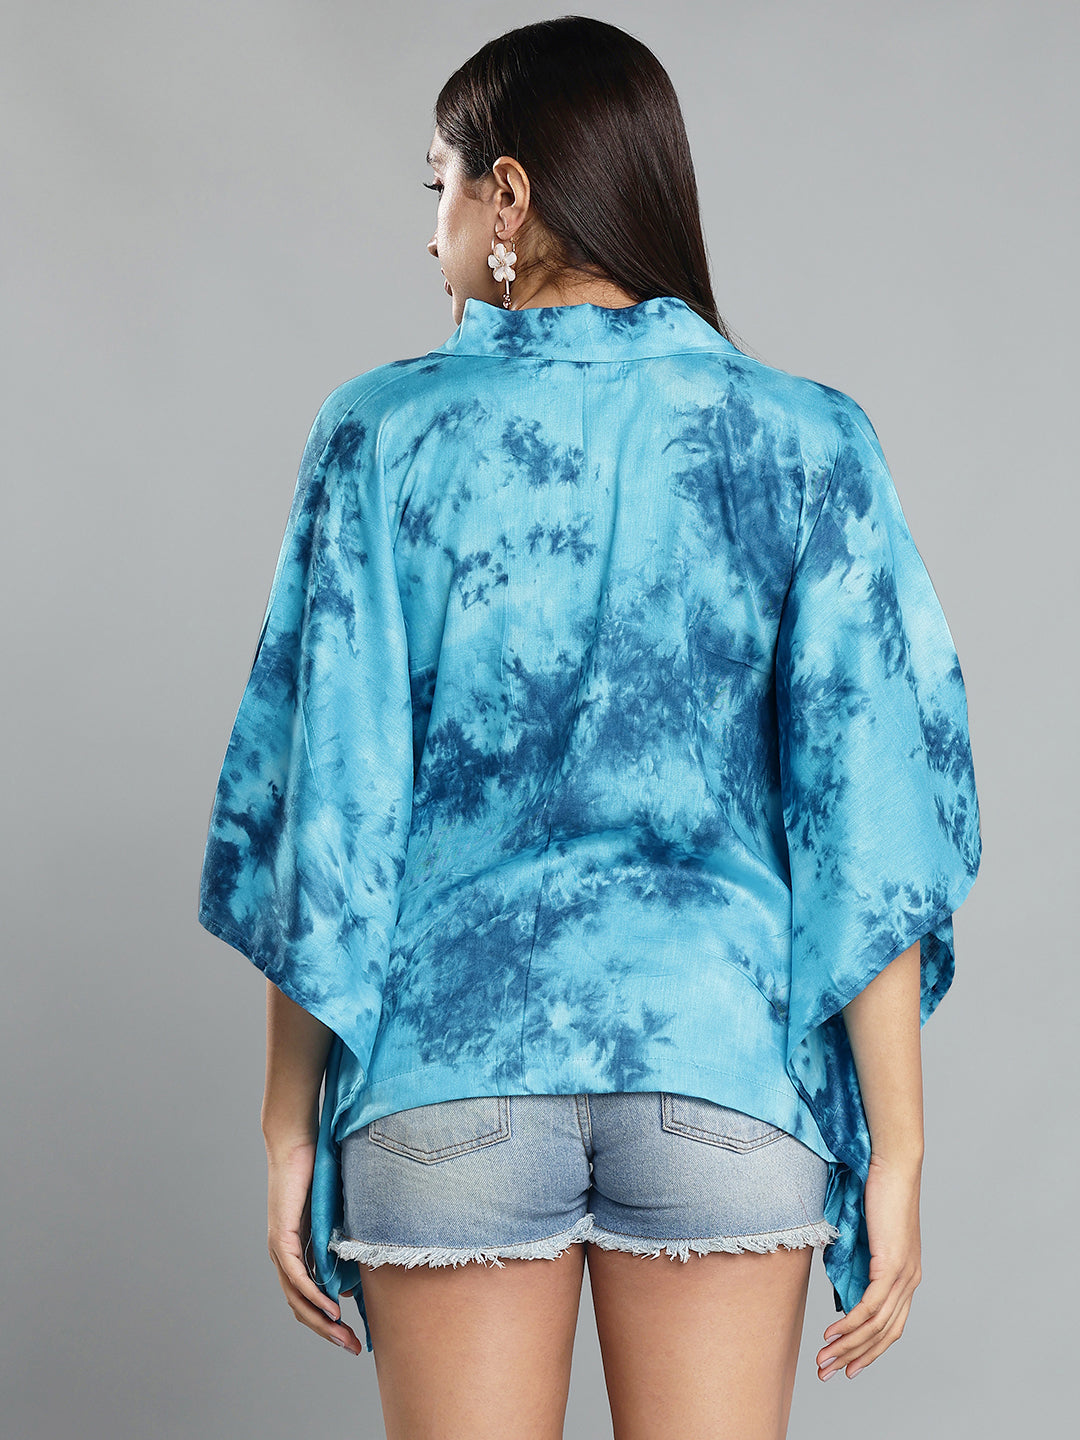 SkyBlue Rayon TieDyeTop- Tranquil